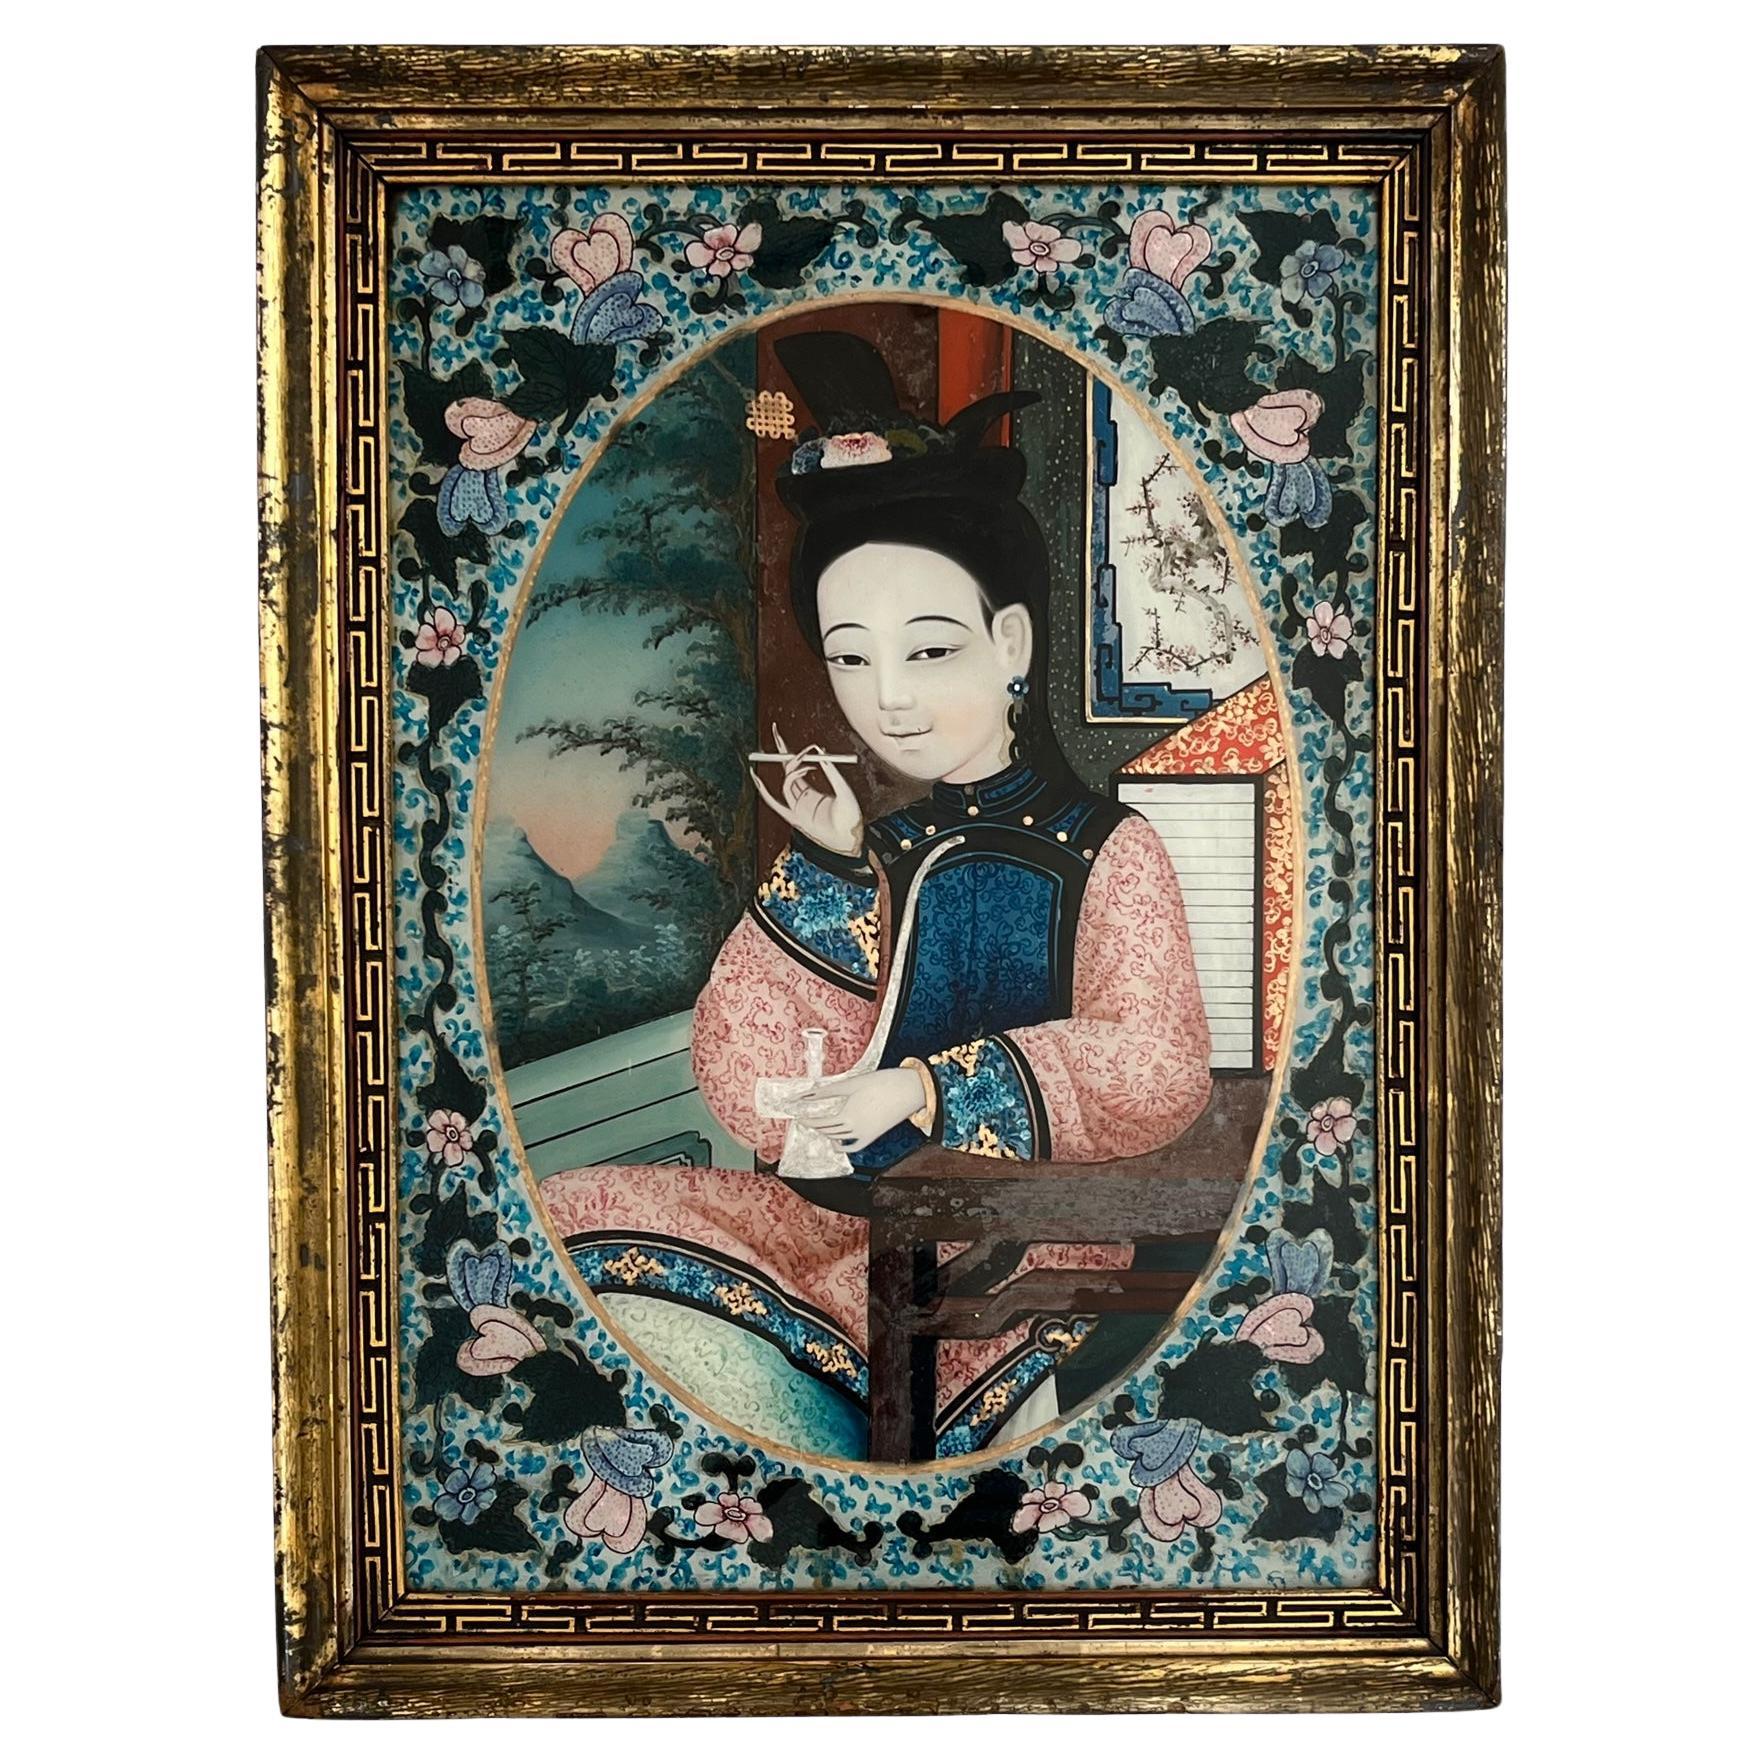 Chinese Export Reverse Glass Portrait Painting of an Opium Maiden, circa 1880